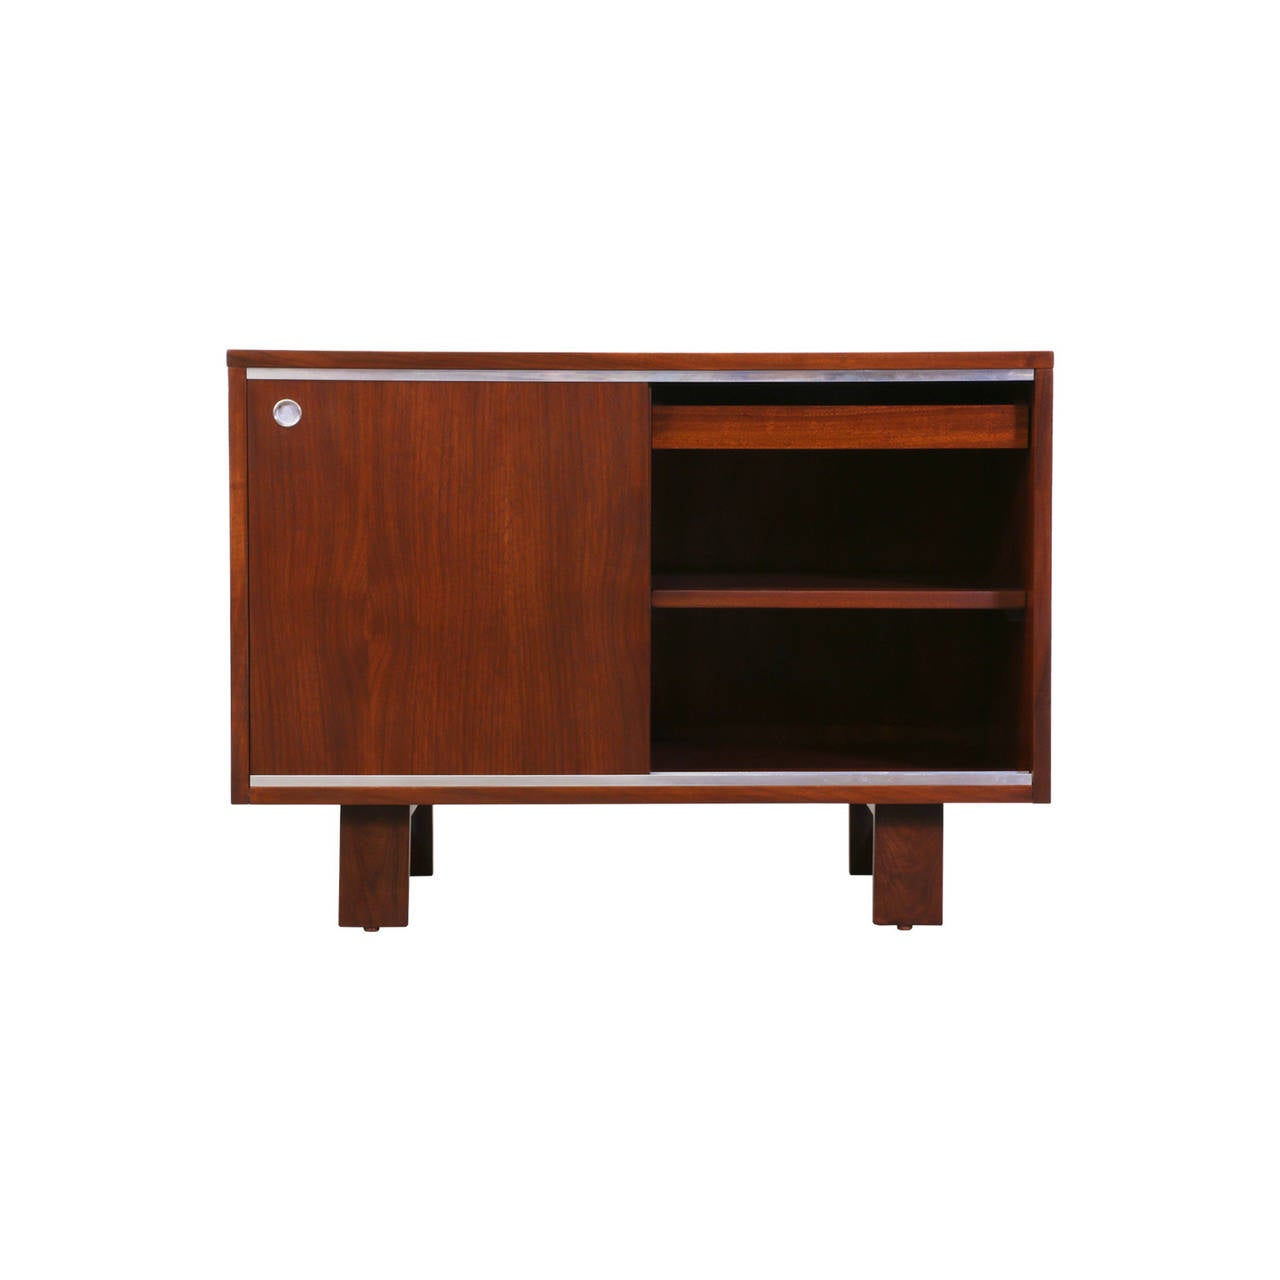 Designer: George Nelson
Manufacturer: Herman Miller
Period/Style: Mid Century Modern
Country: United States
Date: 1950’s

Dimensions: 35″L x 19″W x 25″H
Materials: Walnut, Aluminum
Condition: Excellent – Newly Refinished 
Number of Items: